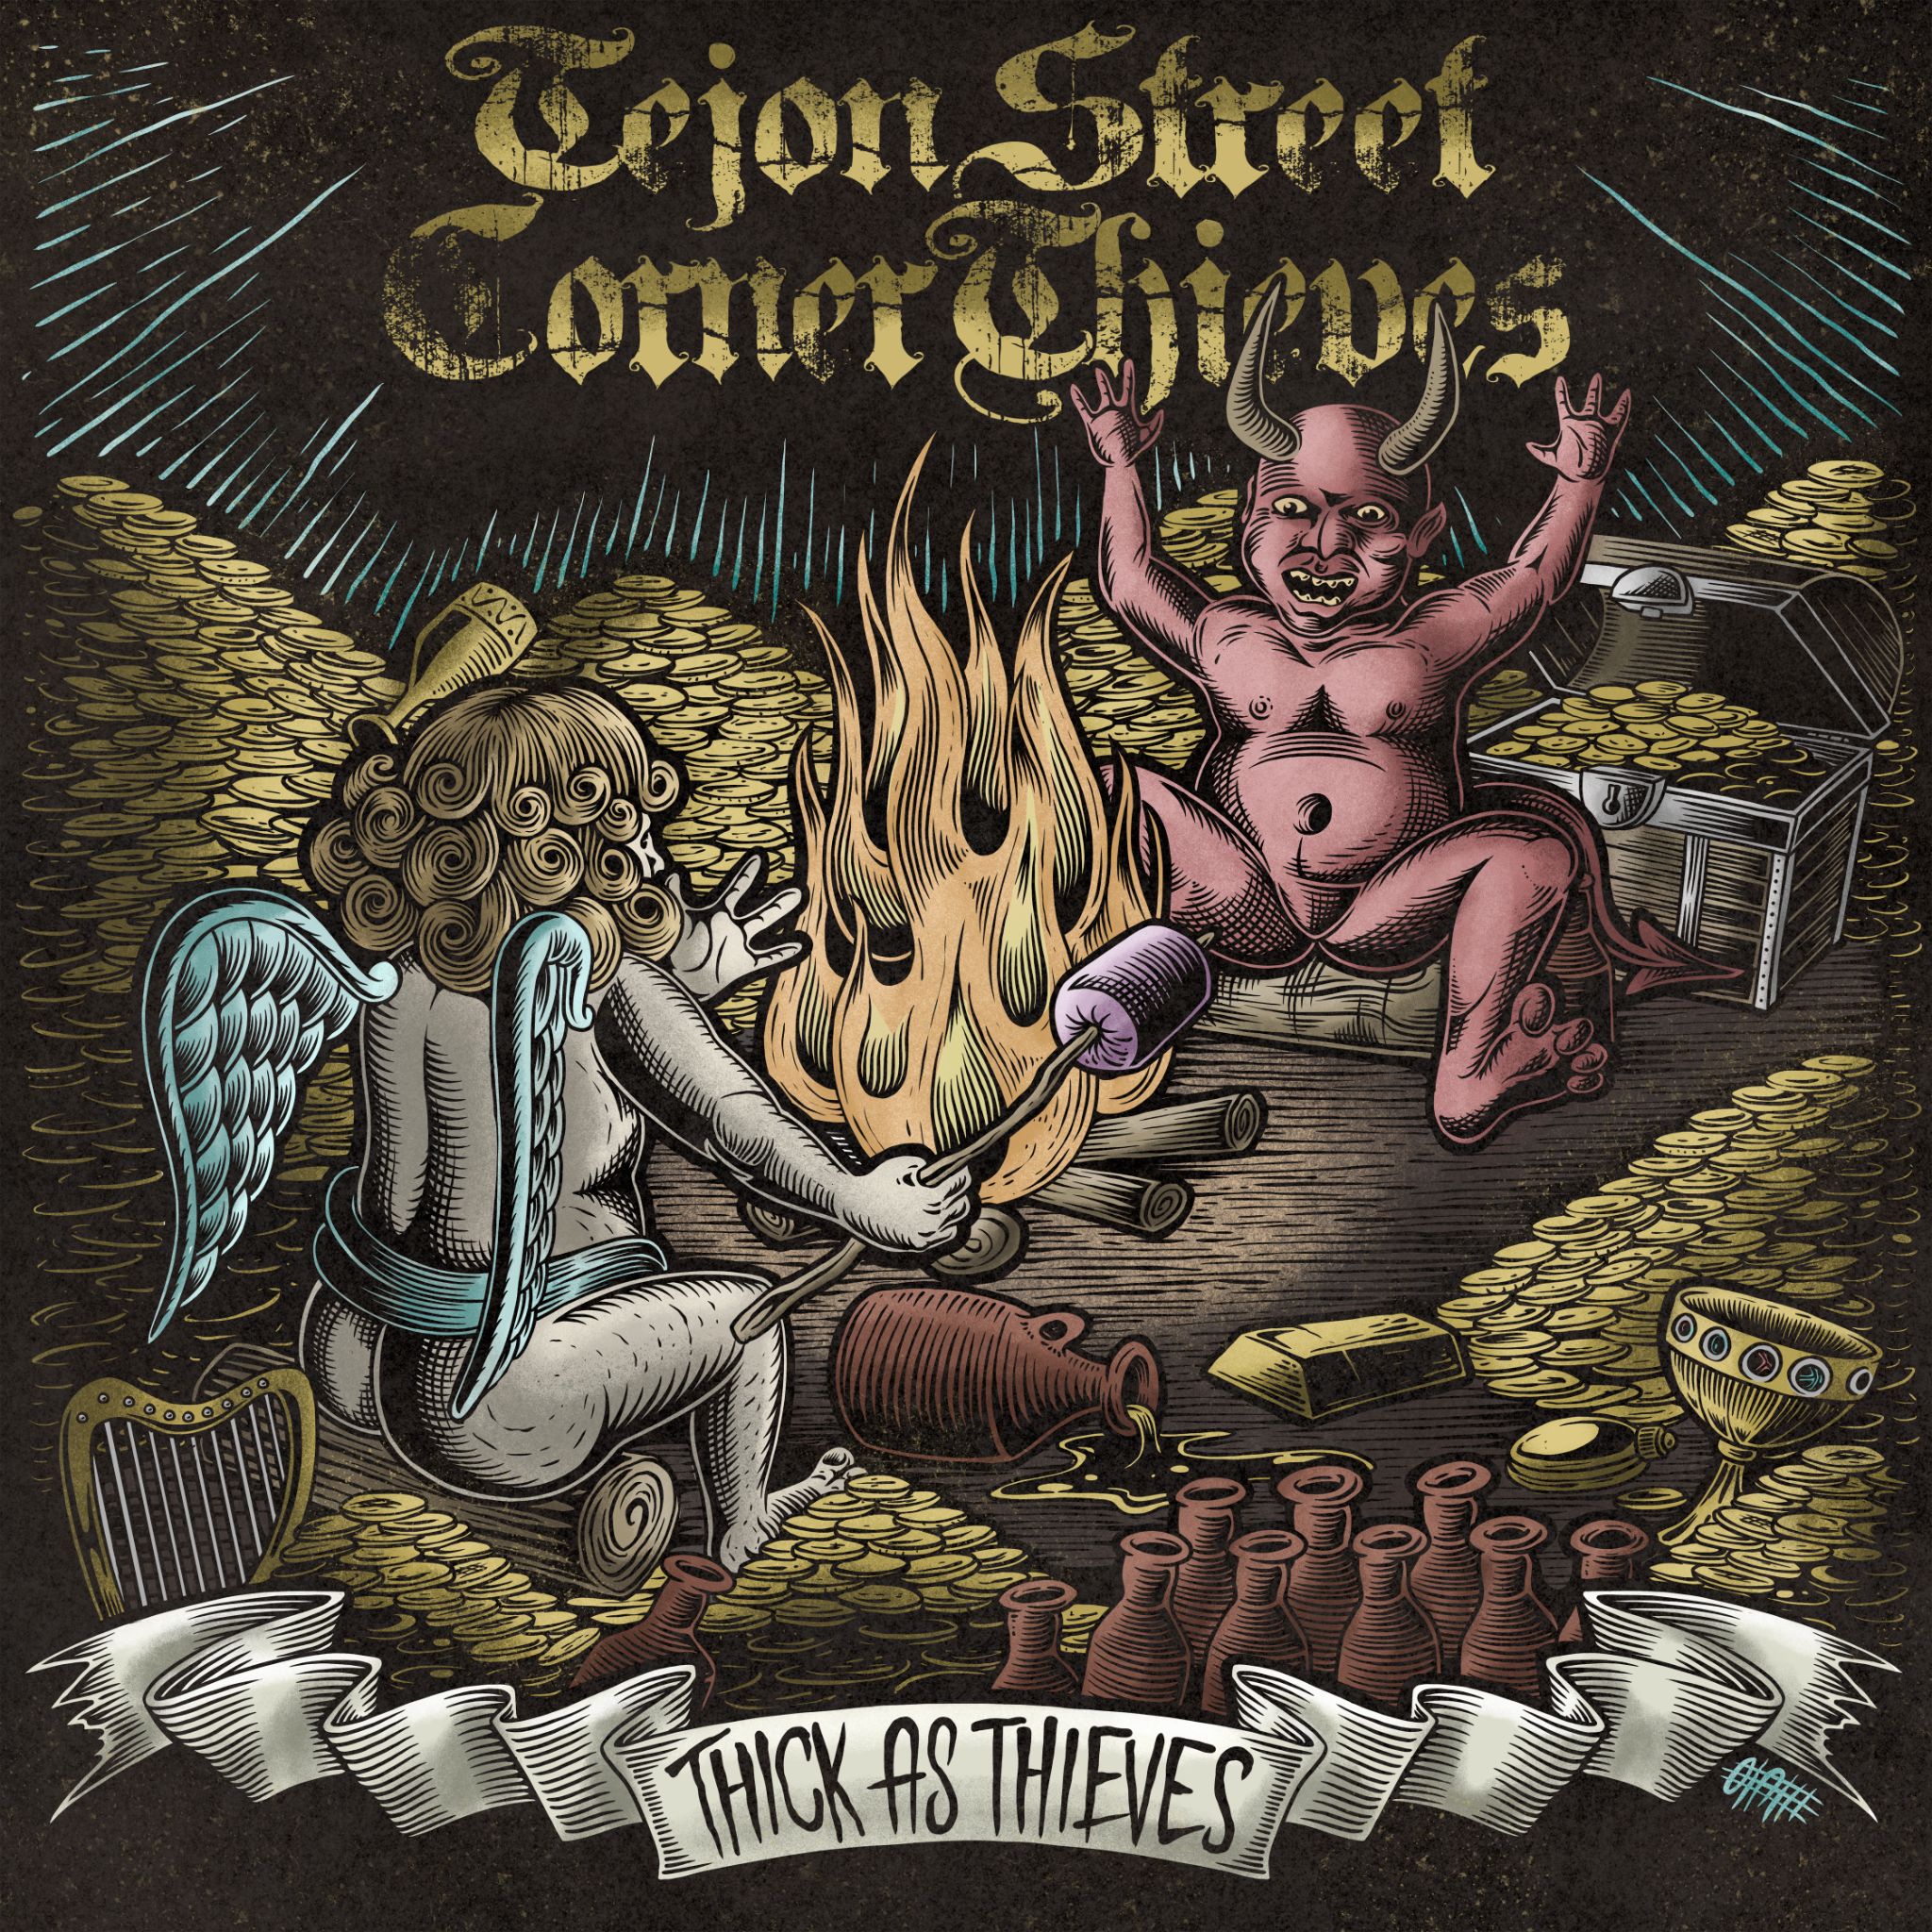 Tejon Street Corner Thieves Release New Album ‘Thick As Thieves" and Tour Dates With Dead South